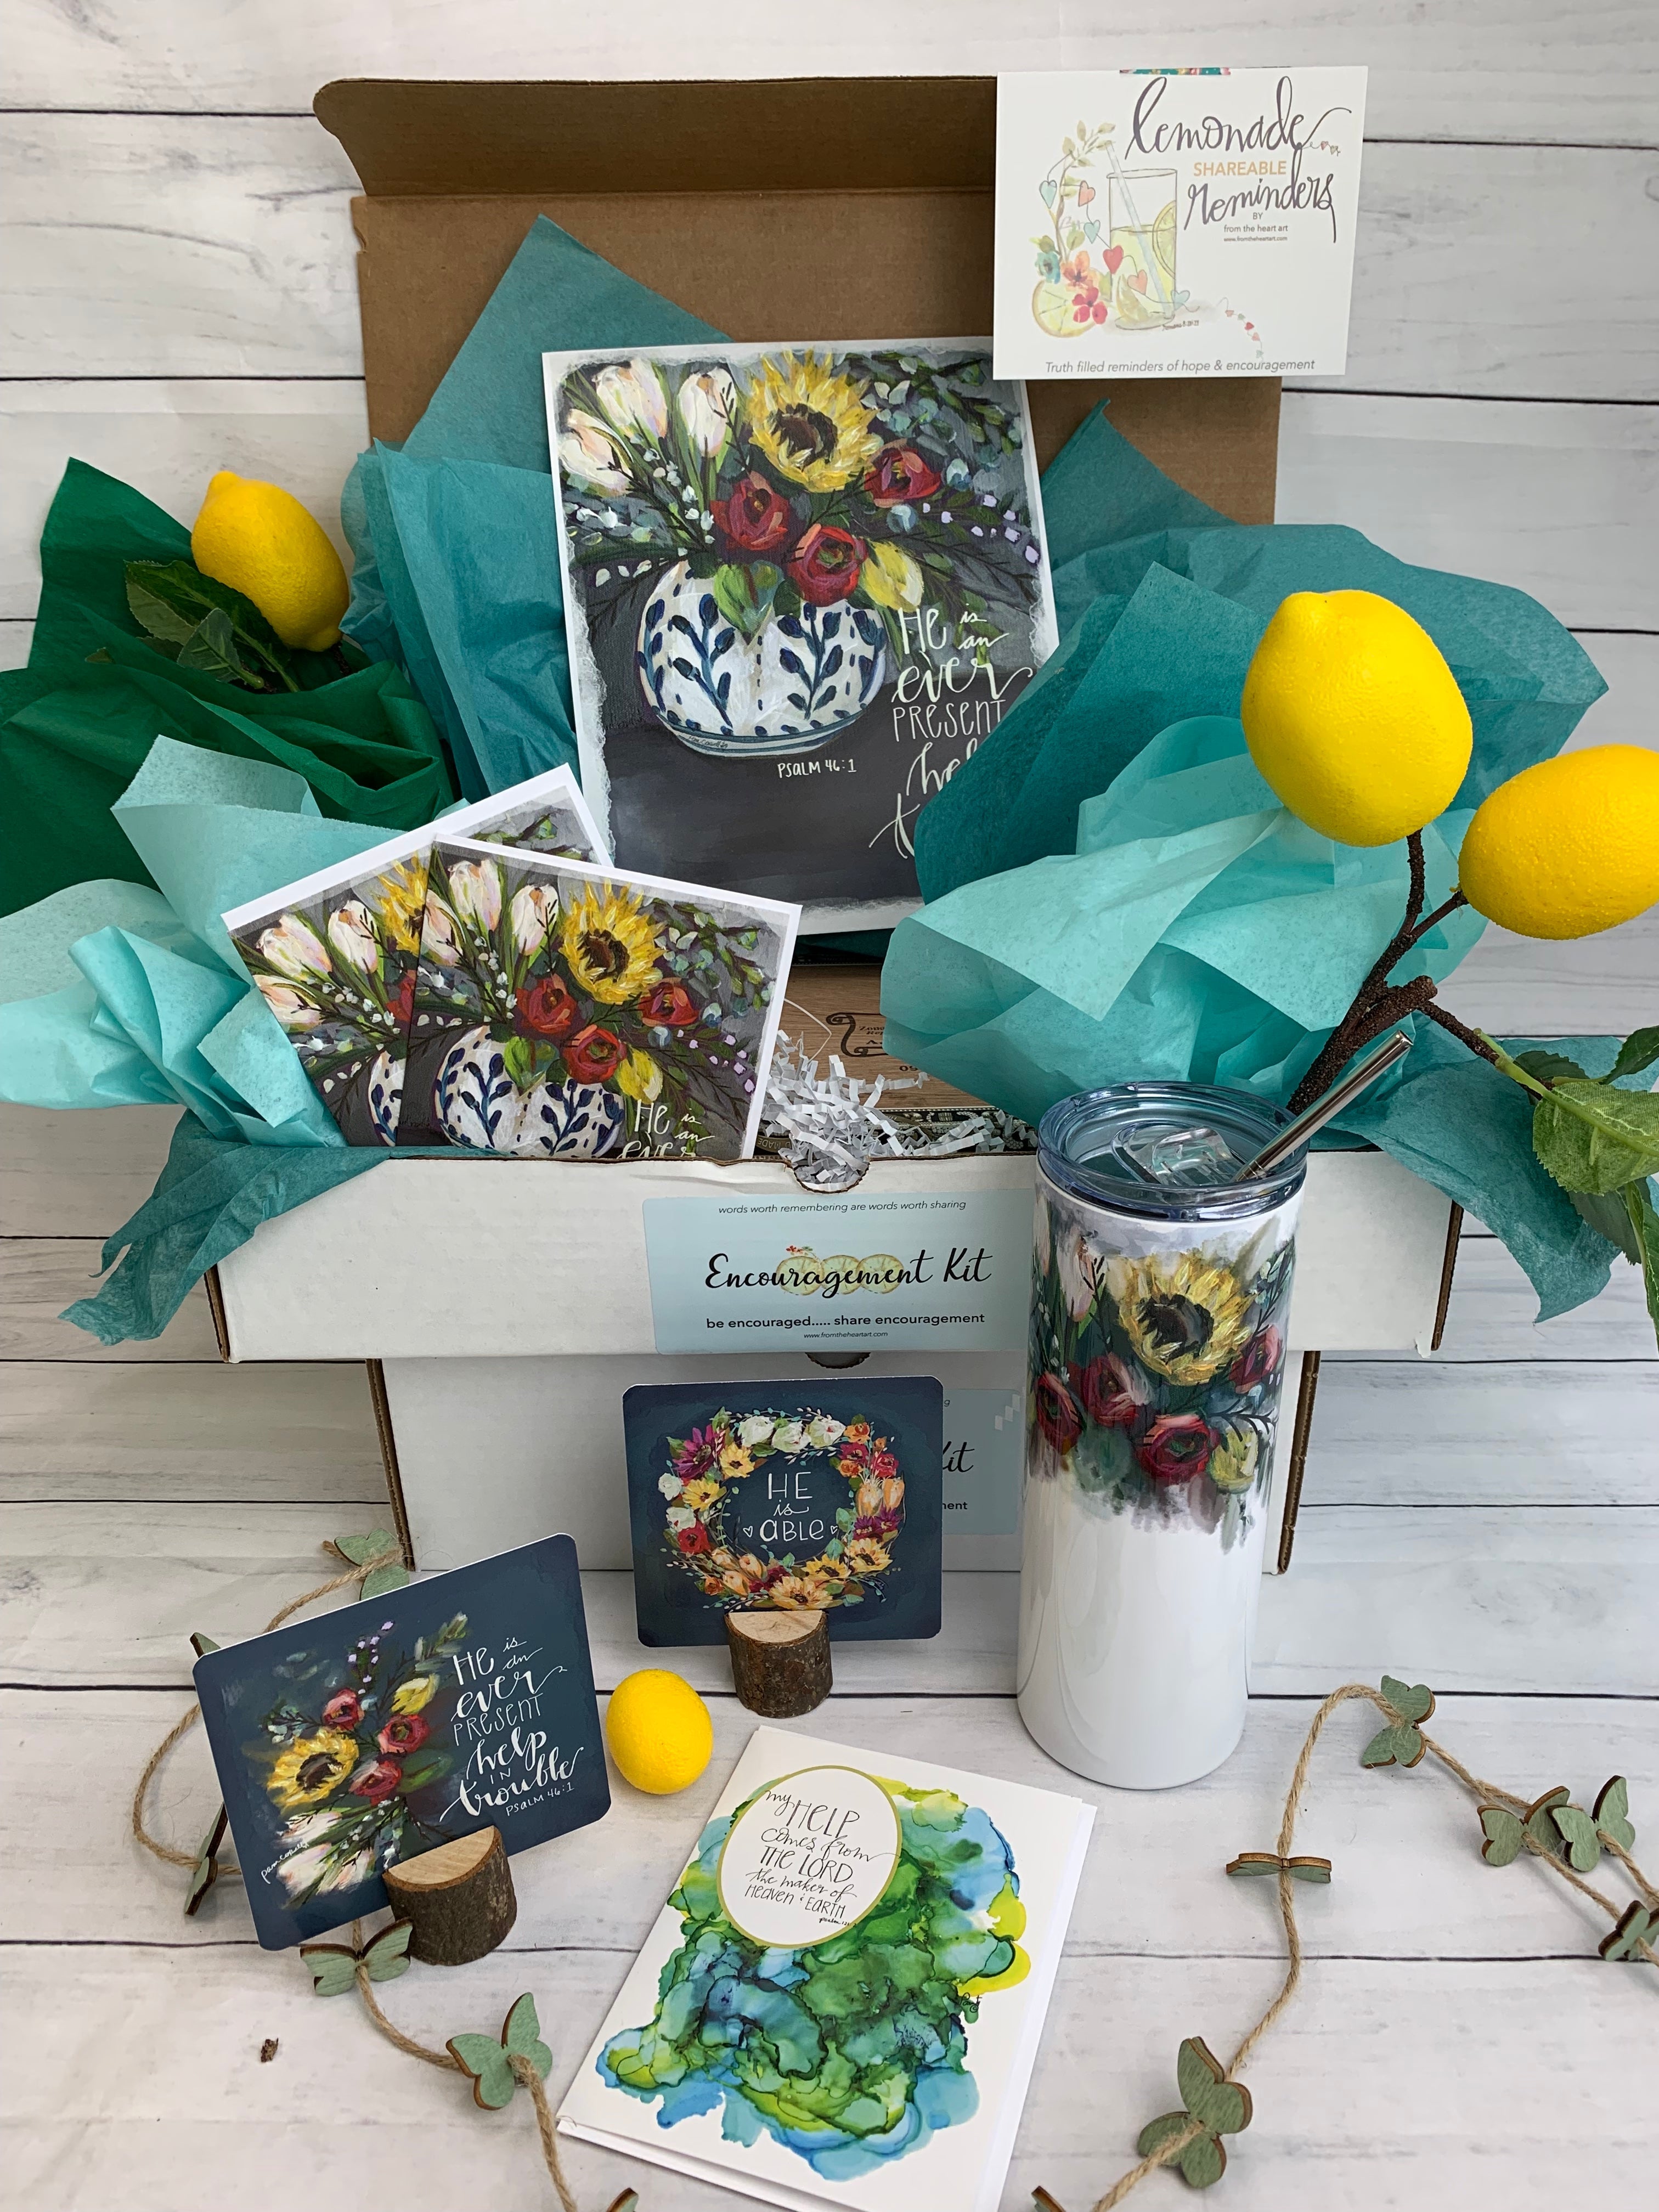 Story Behind the Art: What's Inside July's "Lemonade Reminders" Christian Subscription Box for Women (+ Why I Chose It)